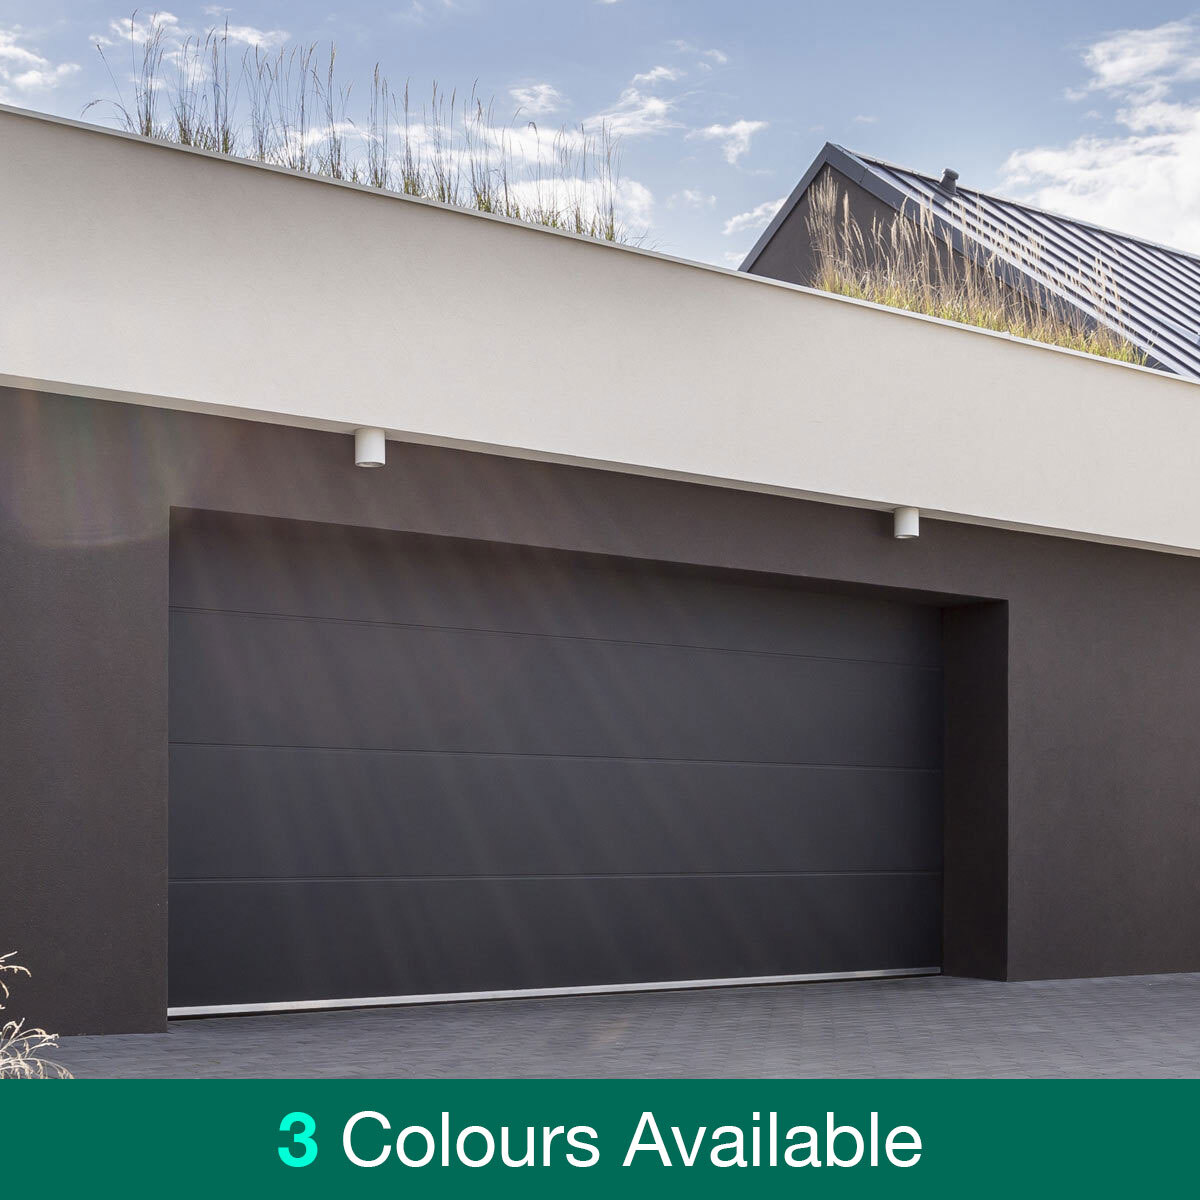 Birkdale Automatic Sectional Garage Door with Installation up to 3.5m Wide